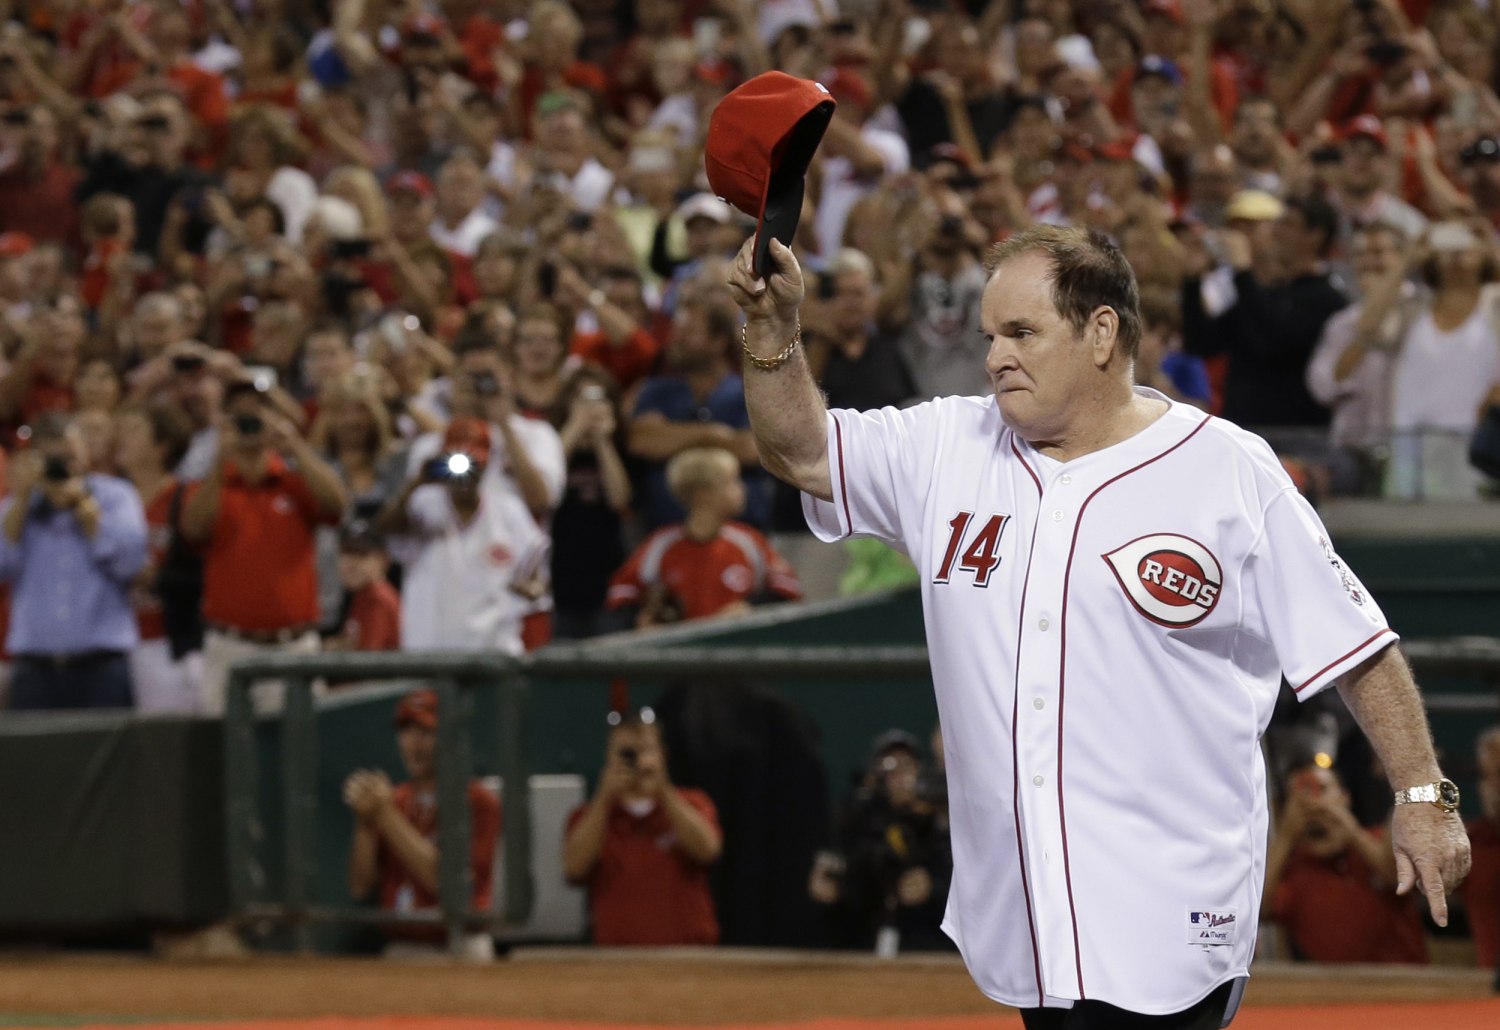 Pete Rose, recipient of lifetime MLB ban for betting, places first